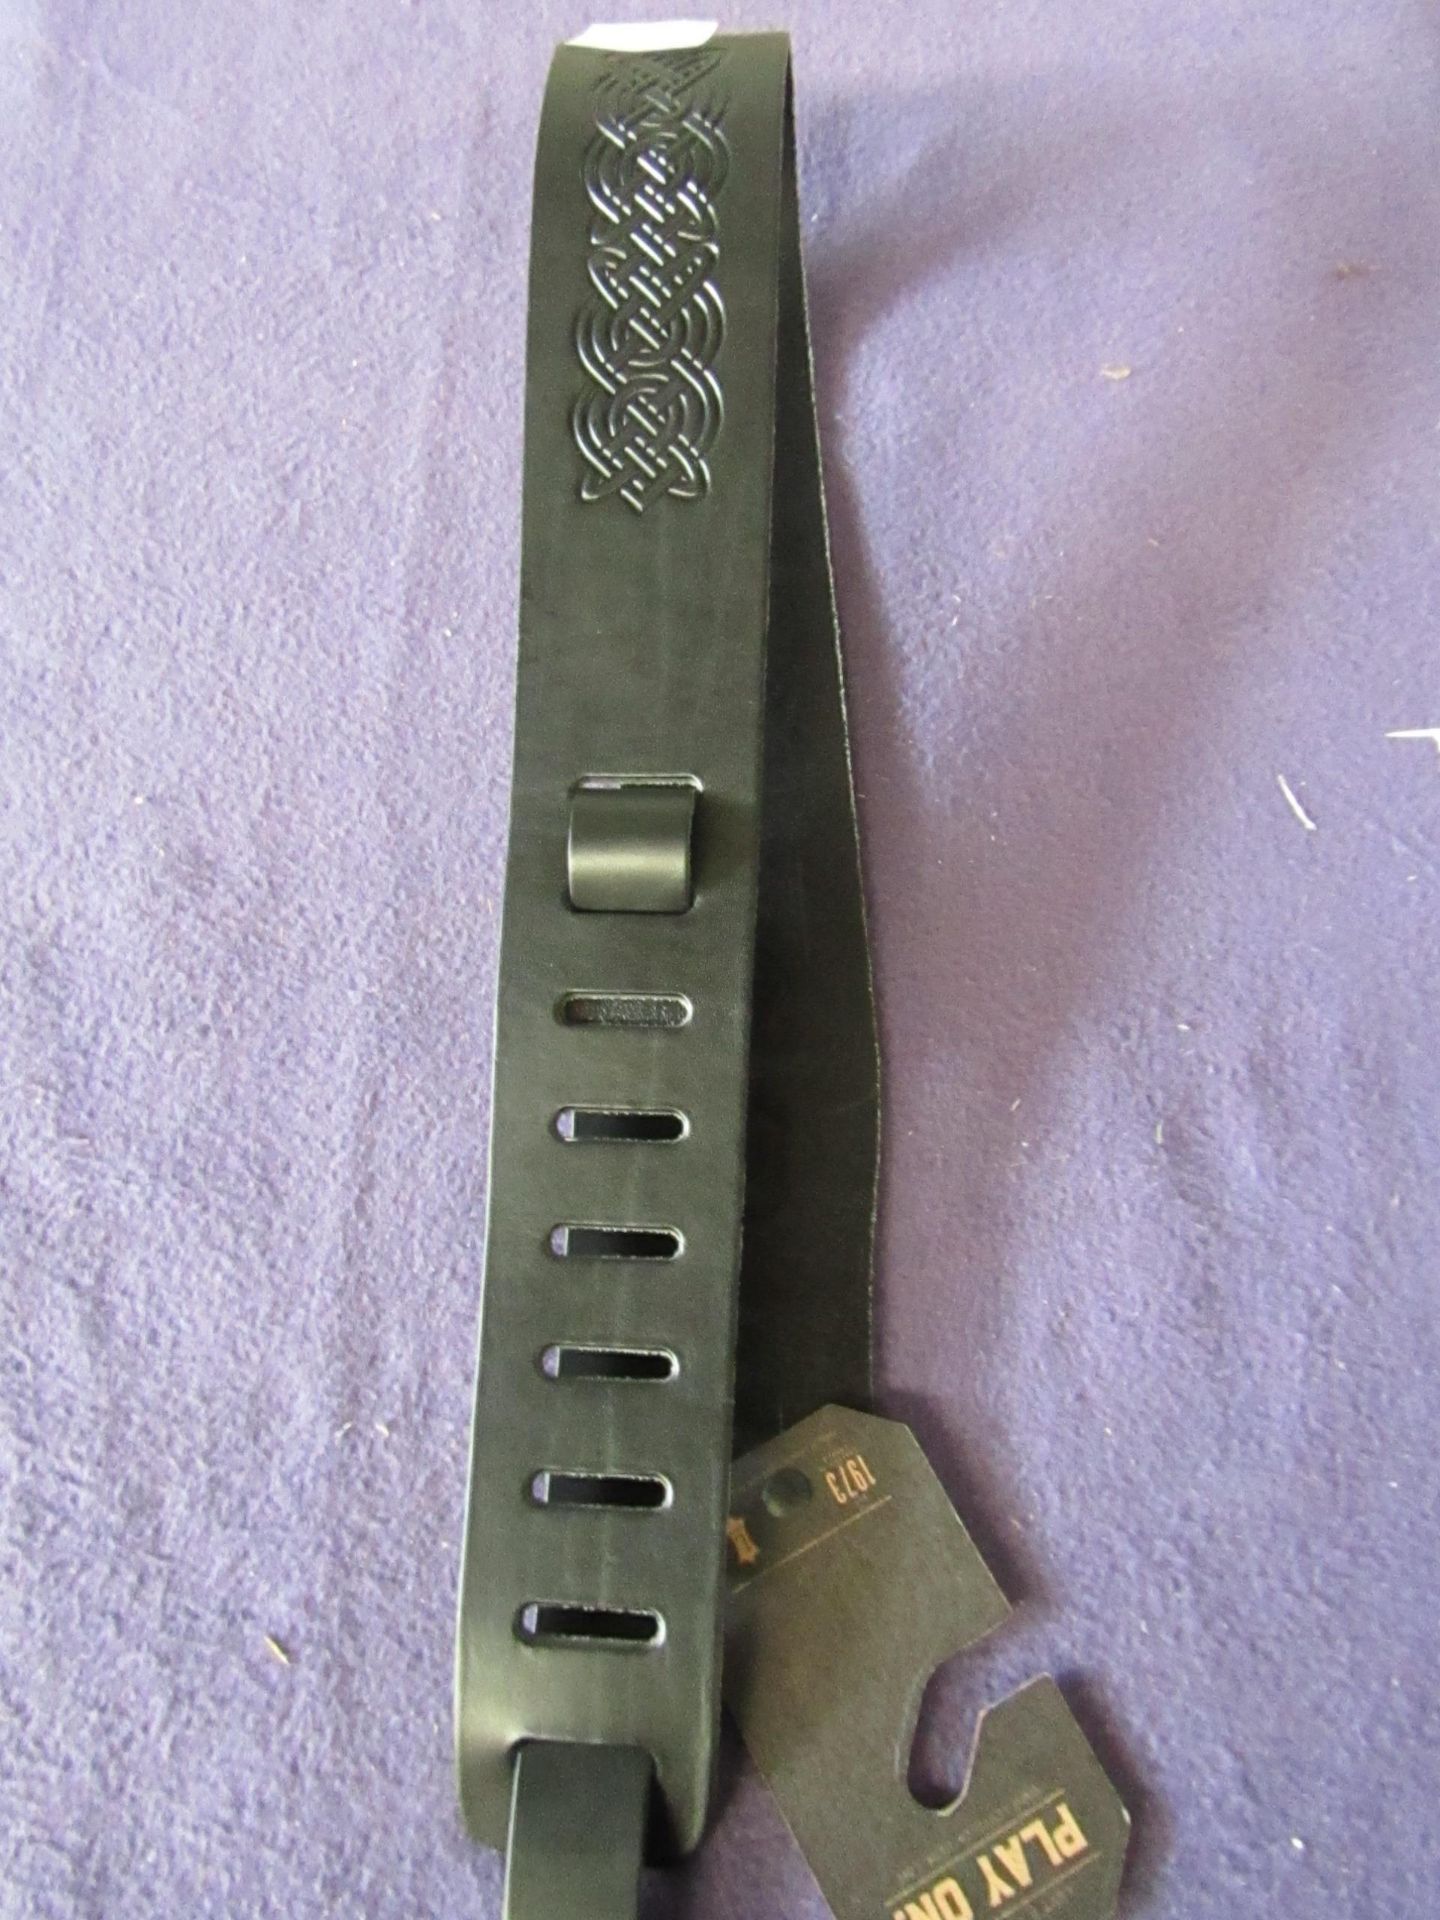 Guitar Strap - Please See Image For Design - Unused, No Packaging.